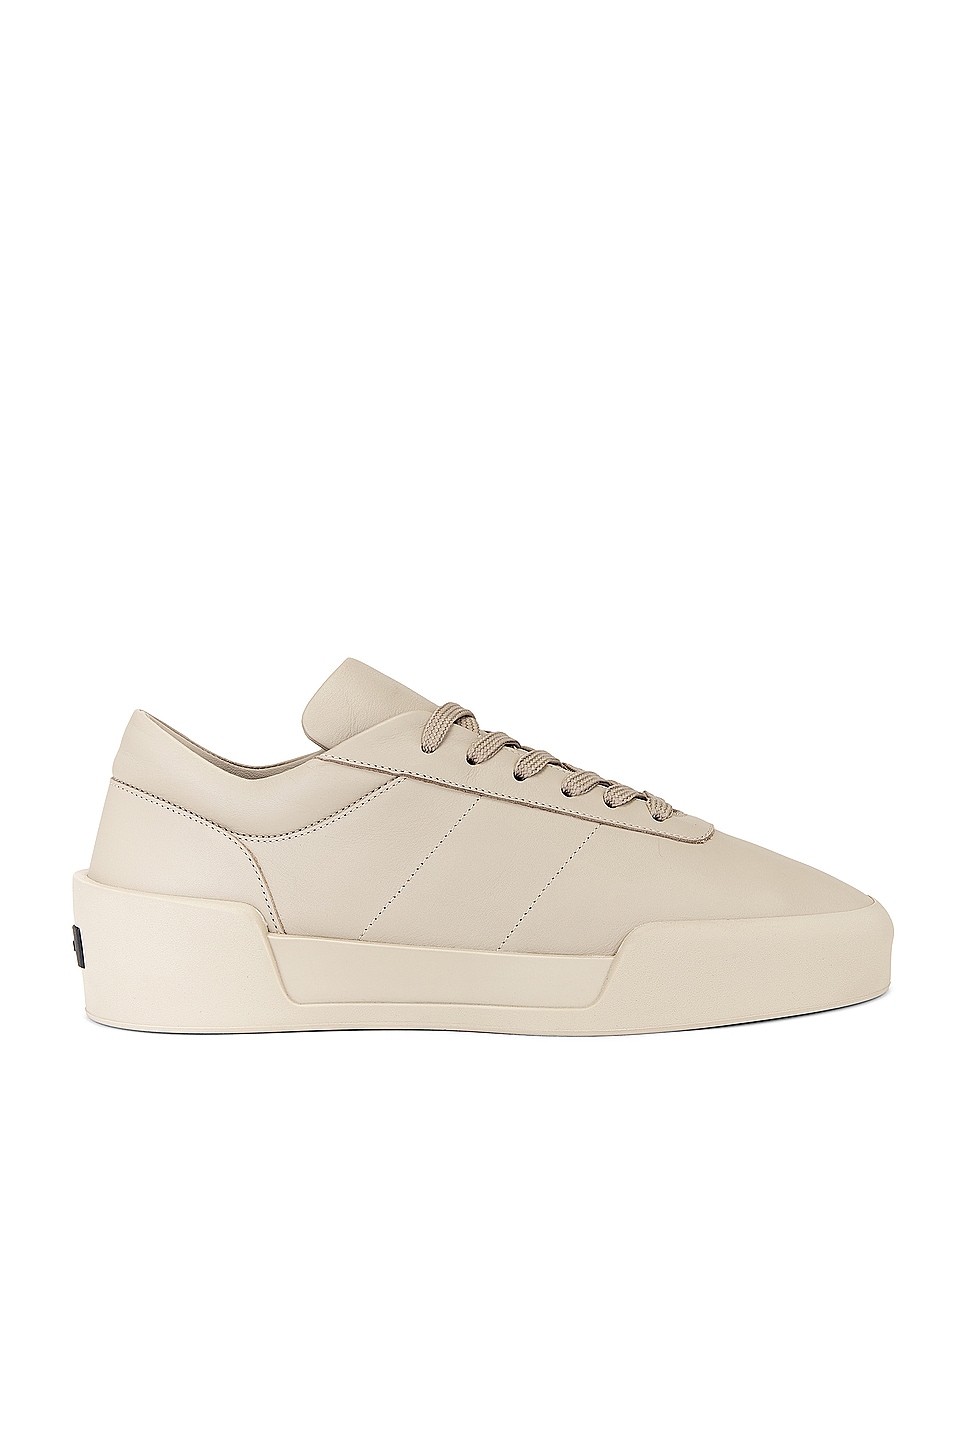 Image 1 of Fear of God Aerobic Low in Taupe